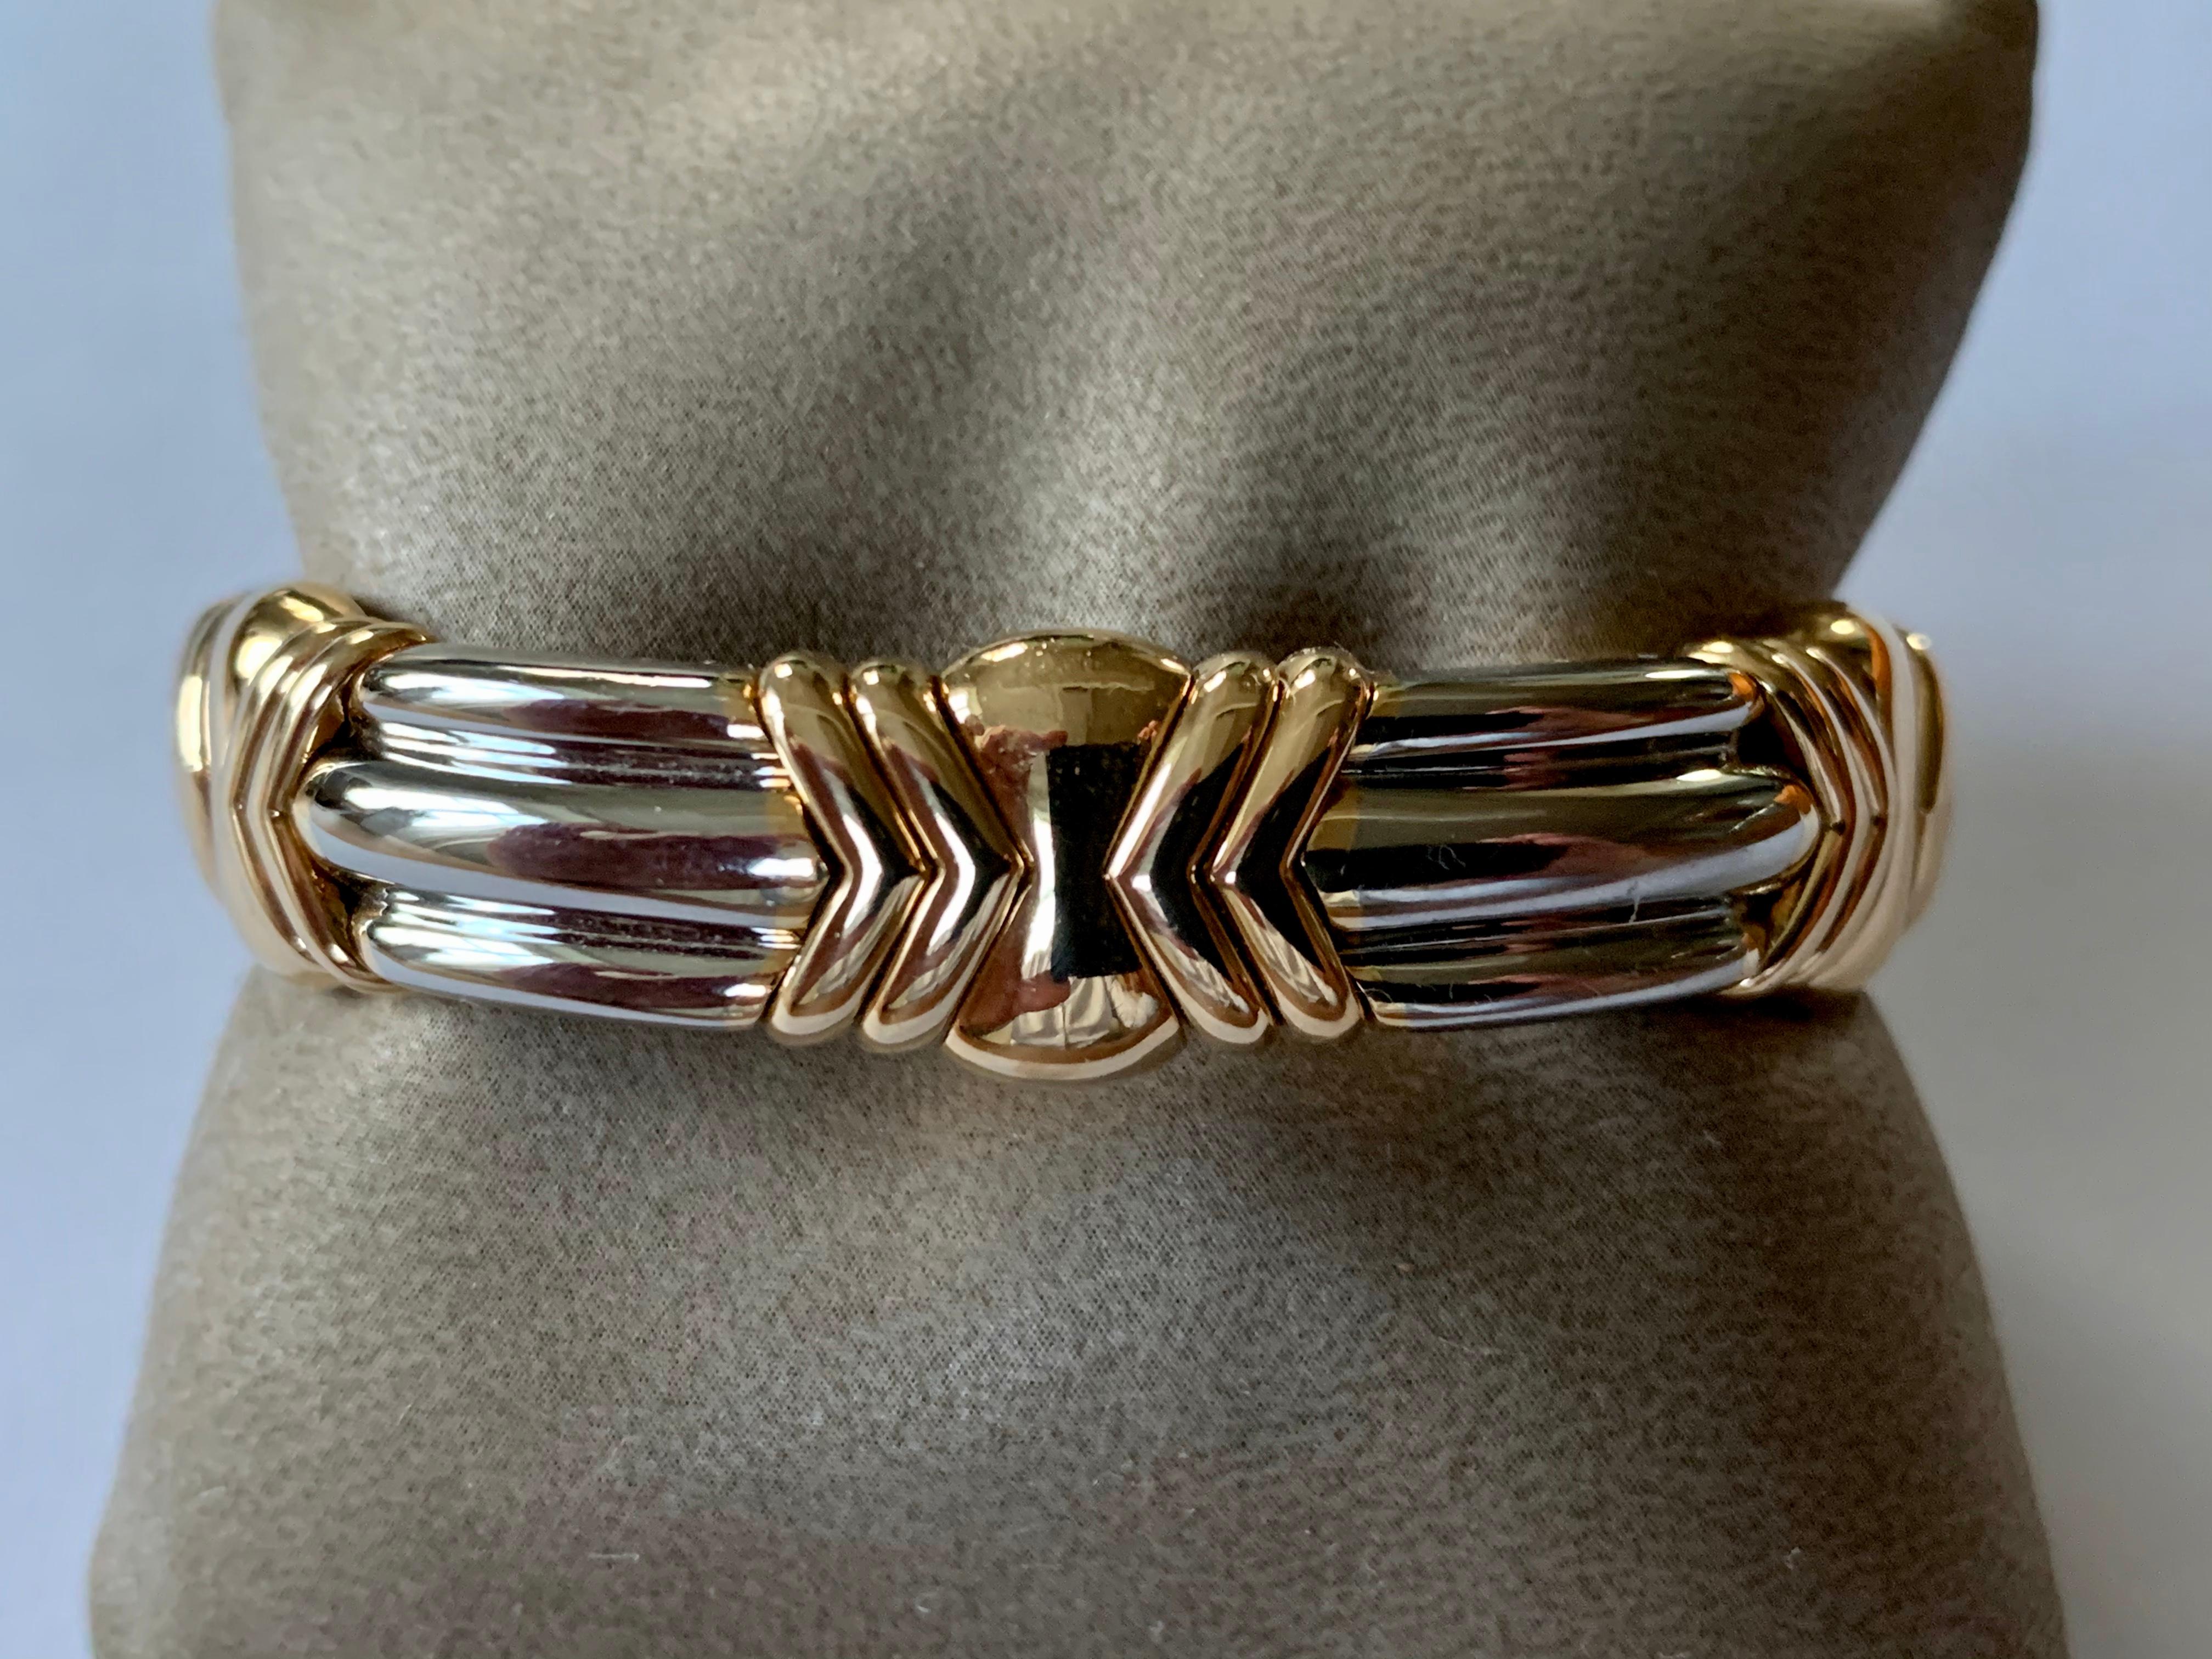 A unique stainless steel and 18k yellow gold Bvlgari bangle. The bangle features a flexible design allowing to a wrist size of up to 19 cm. The bangle measures 13 mm in width and has a gross weight of 64.8 grams.